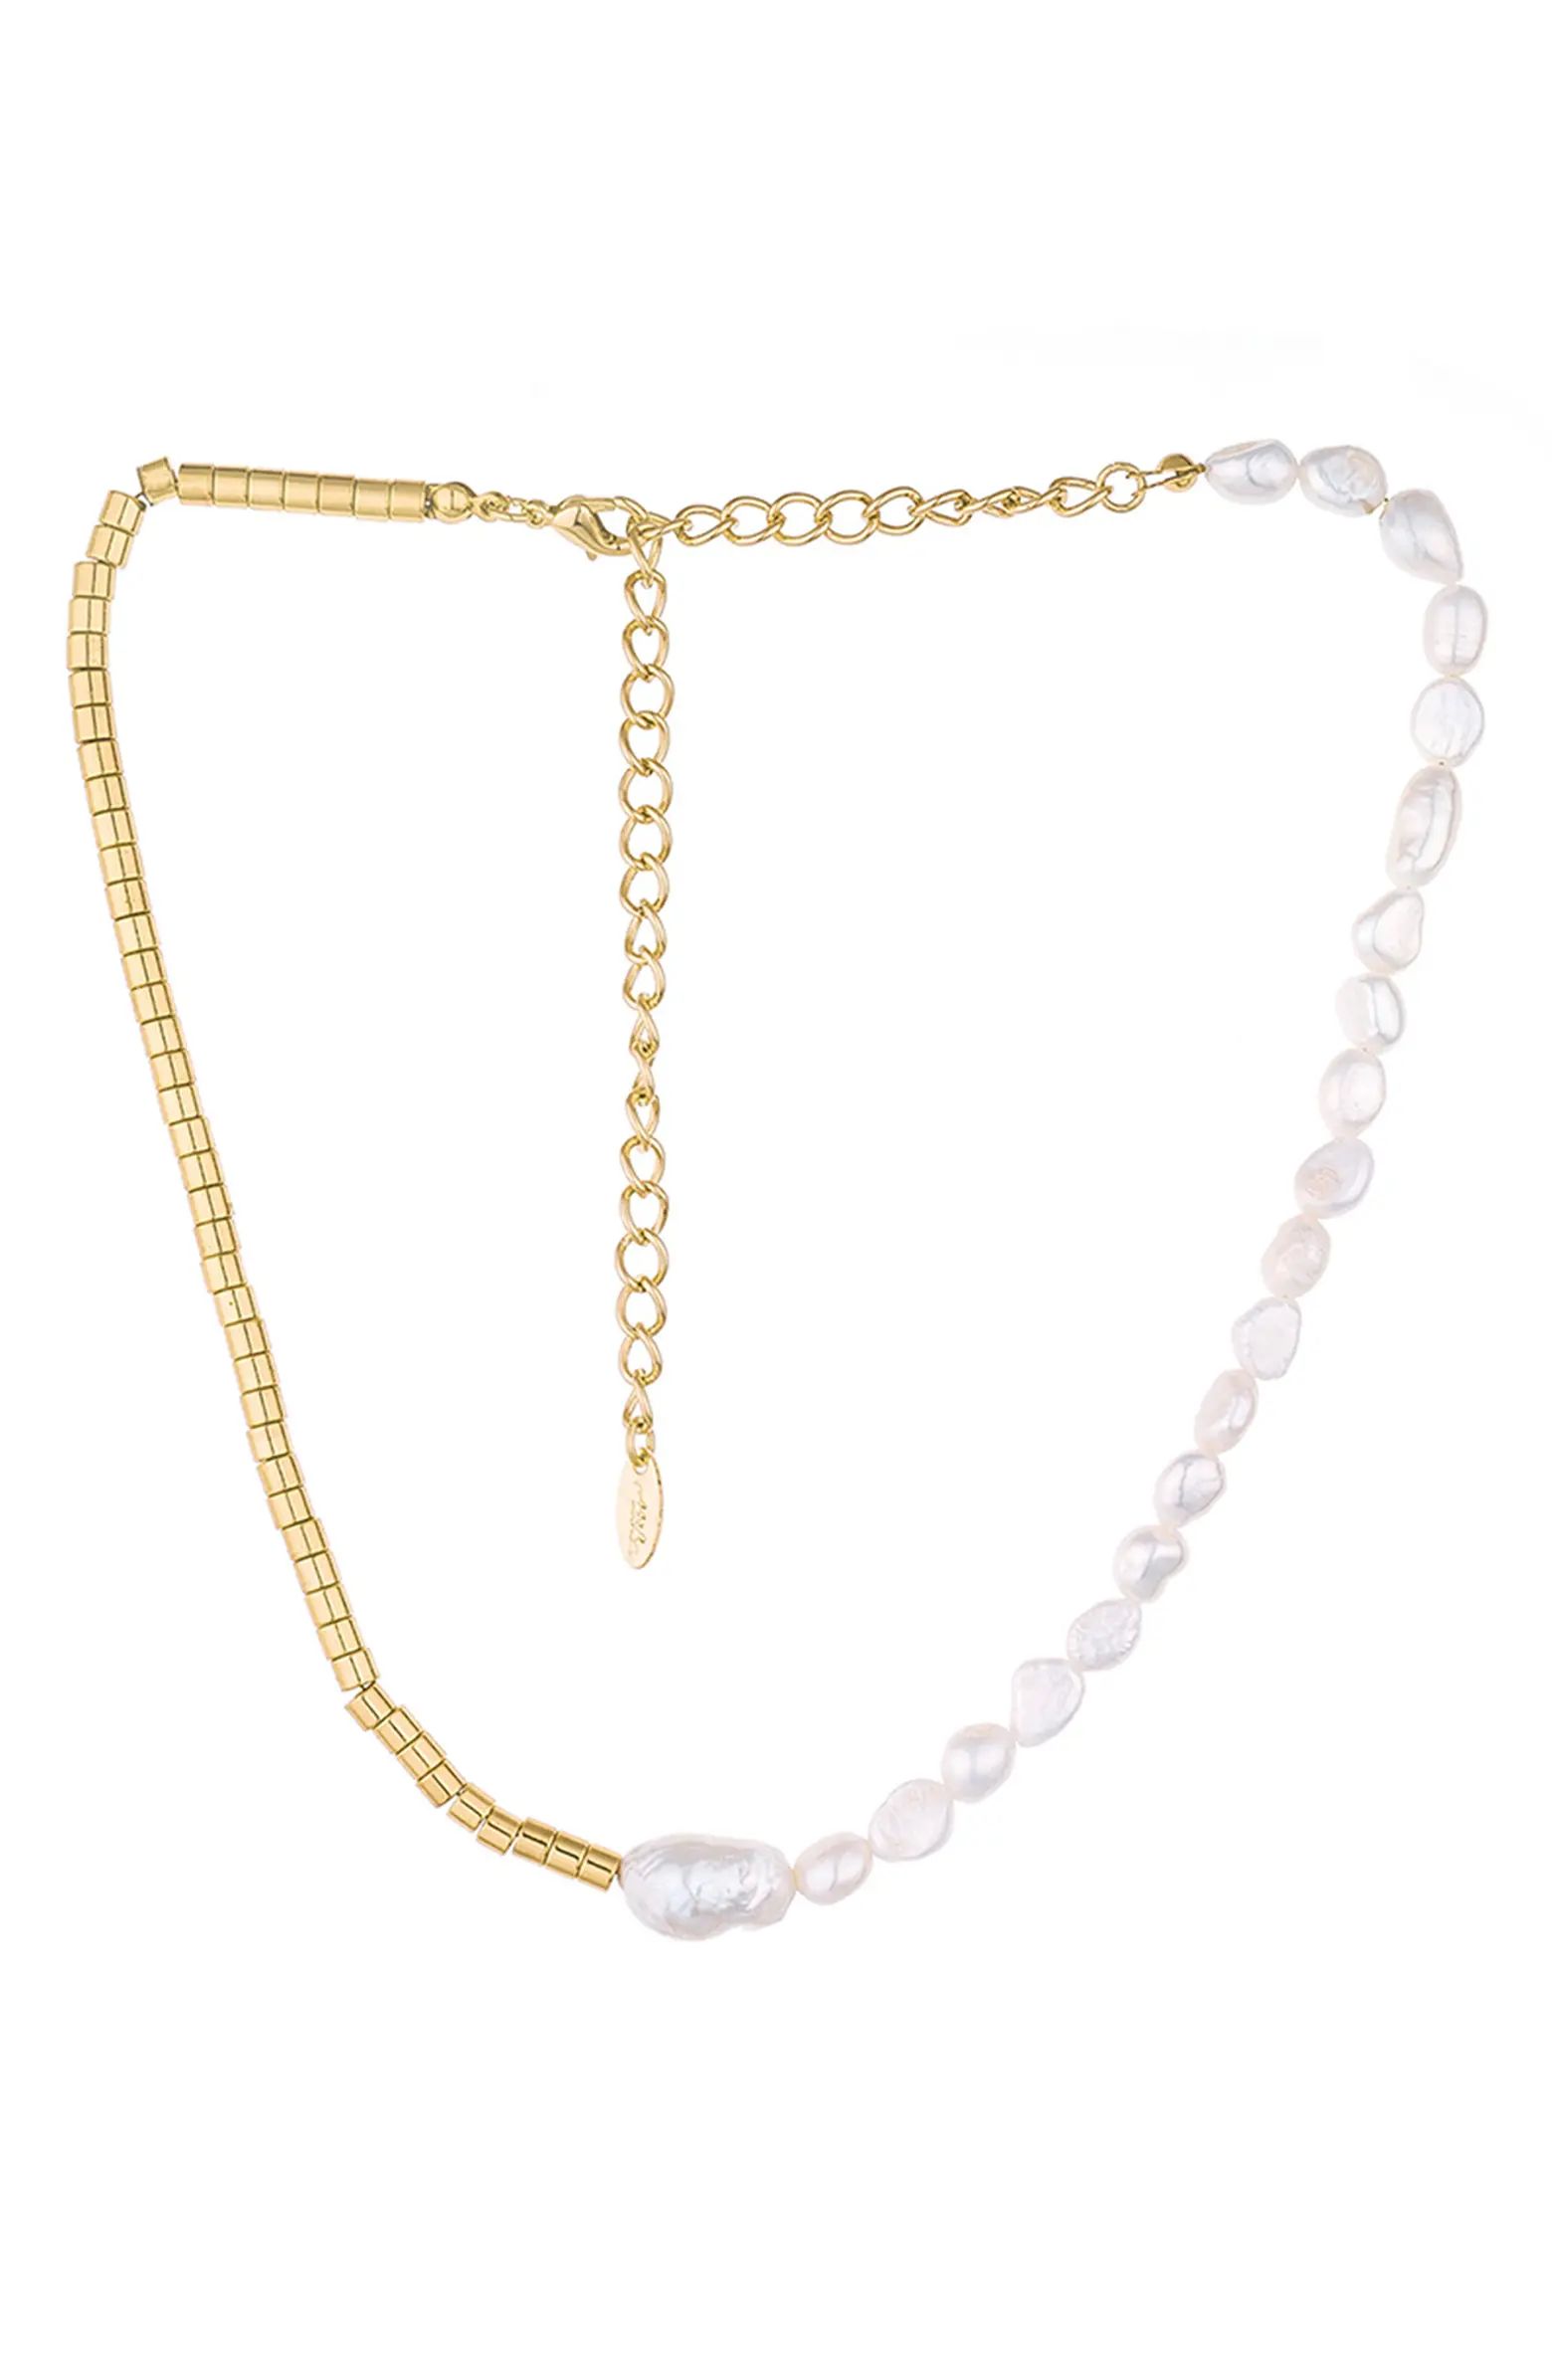 Freshwater Pearl Necklace | Nordstrom